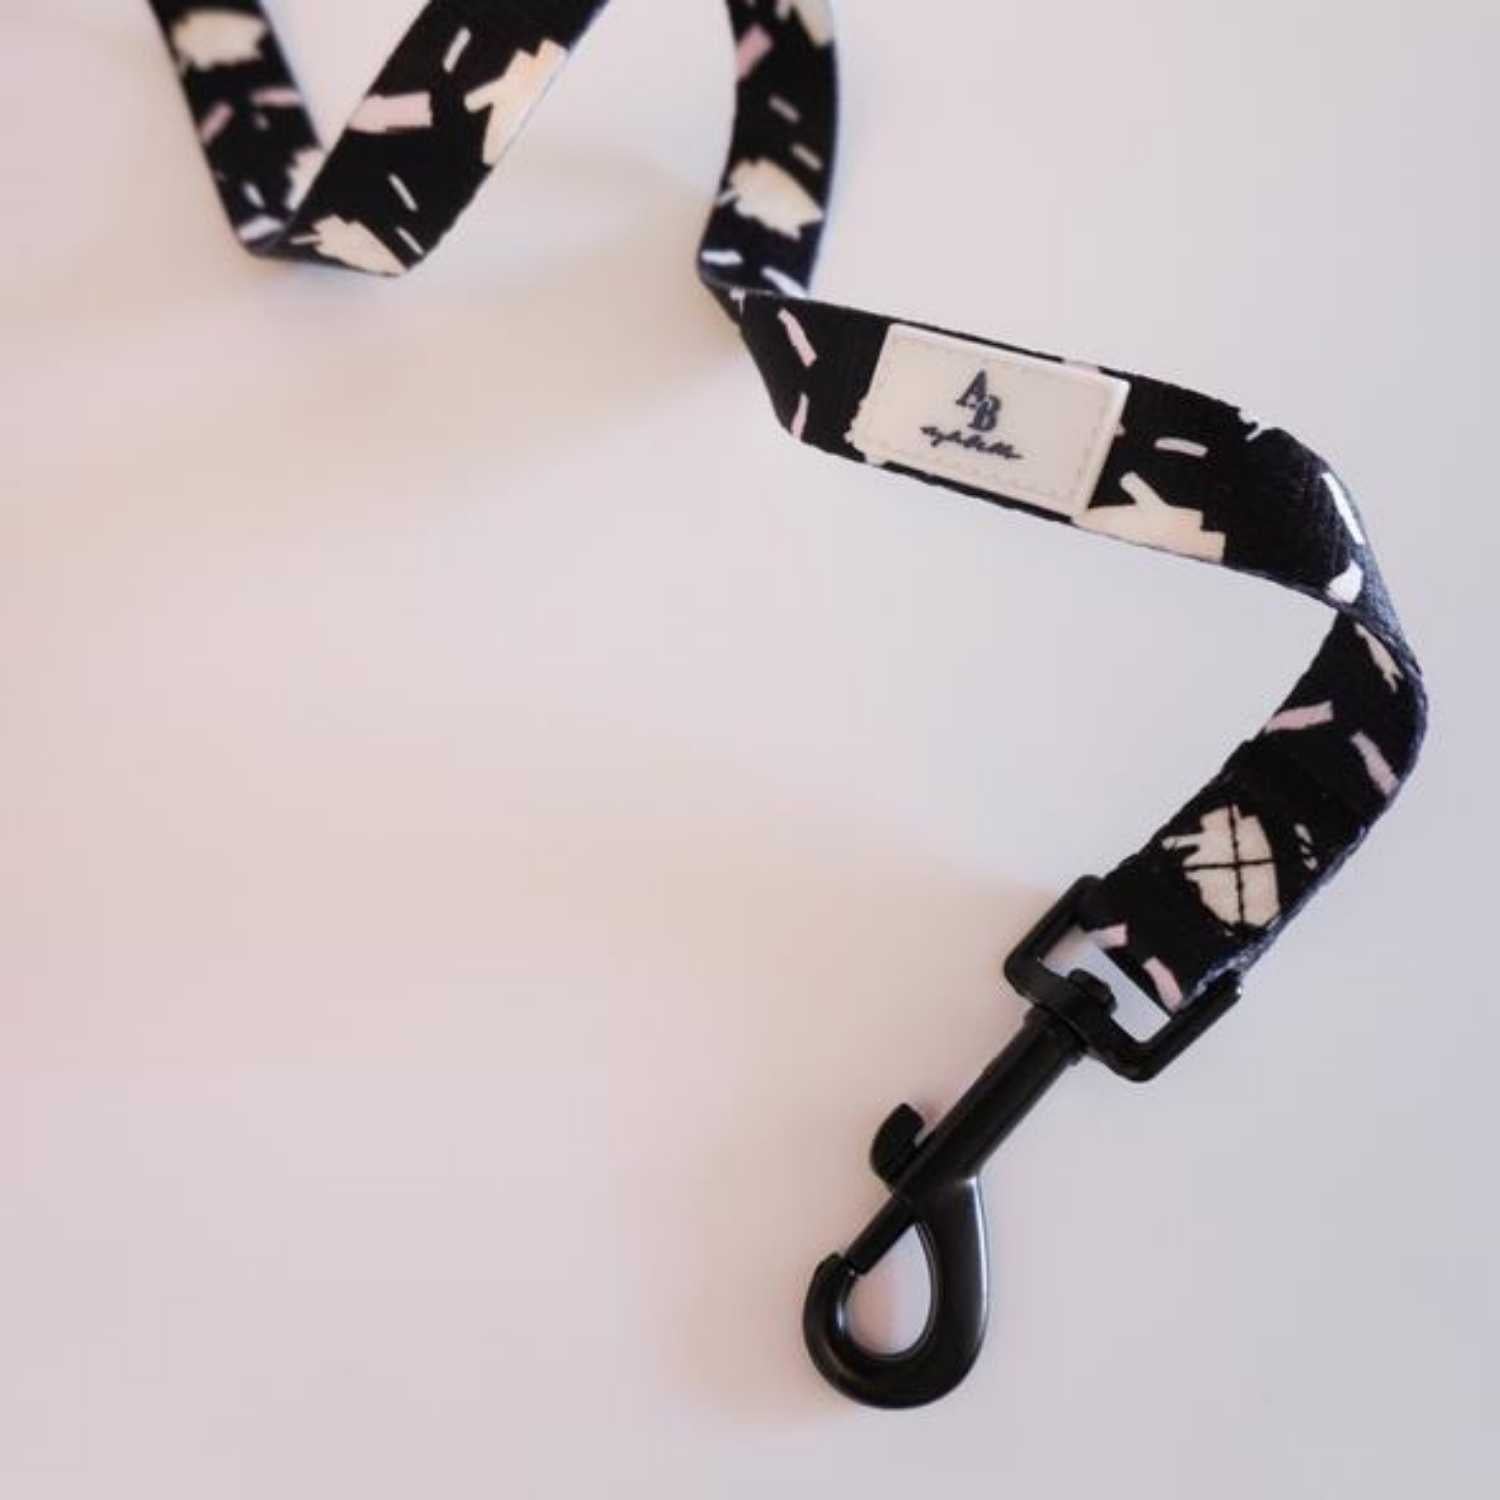 Aylabella Co. - P.S. I Love You Leash - Dog Accessories (3 Sizes/2 Length)